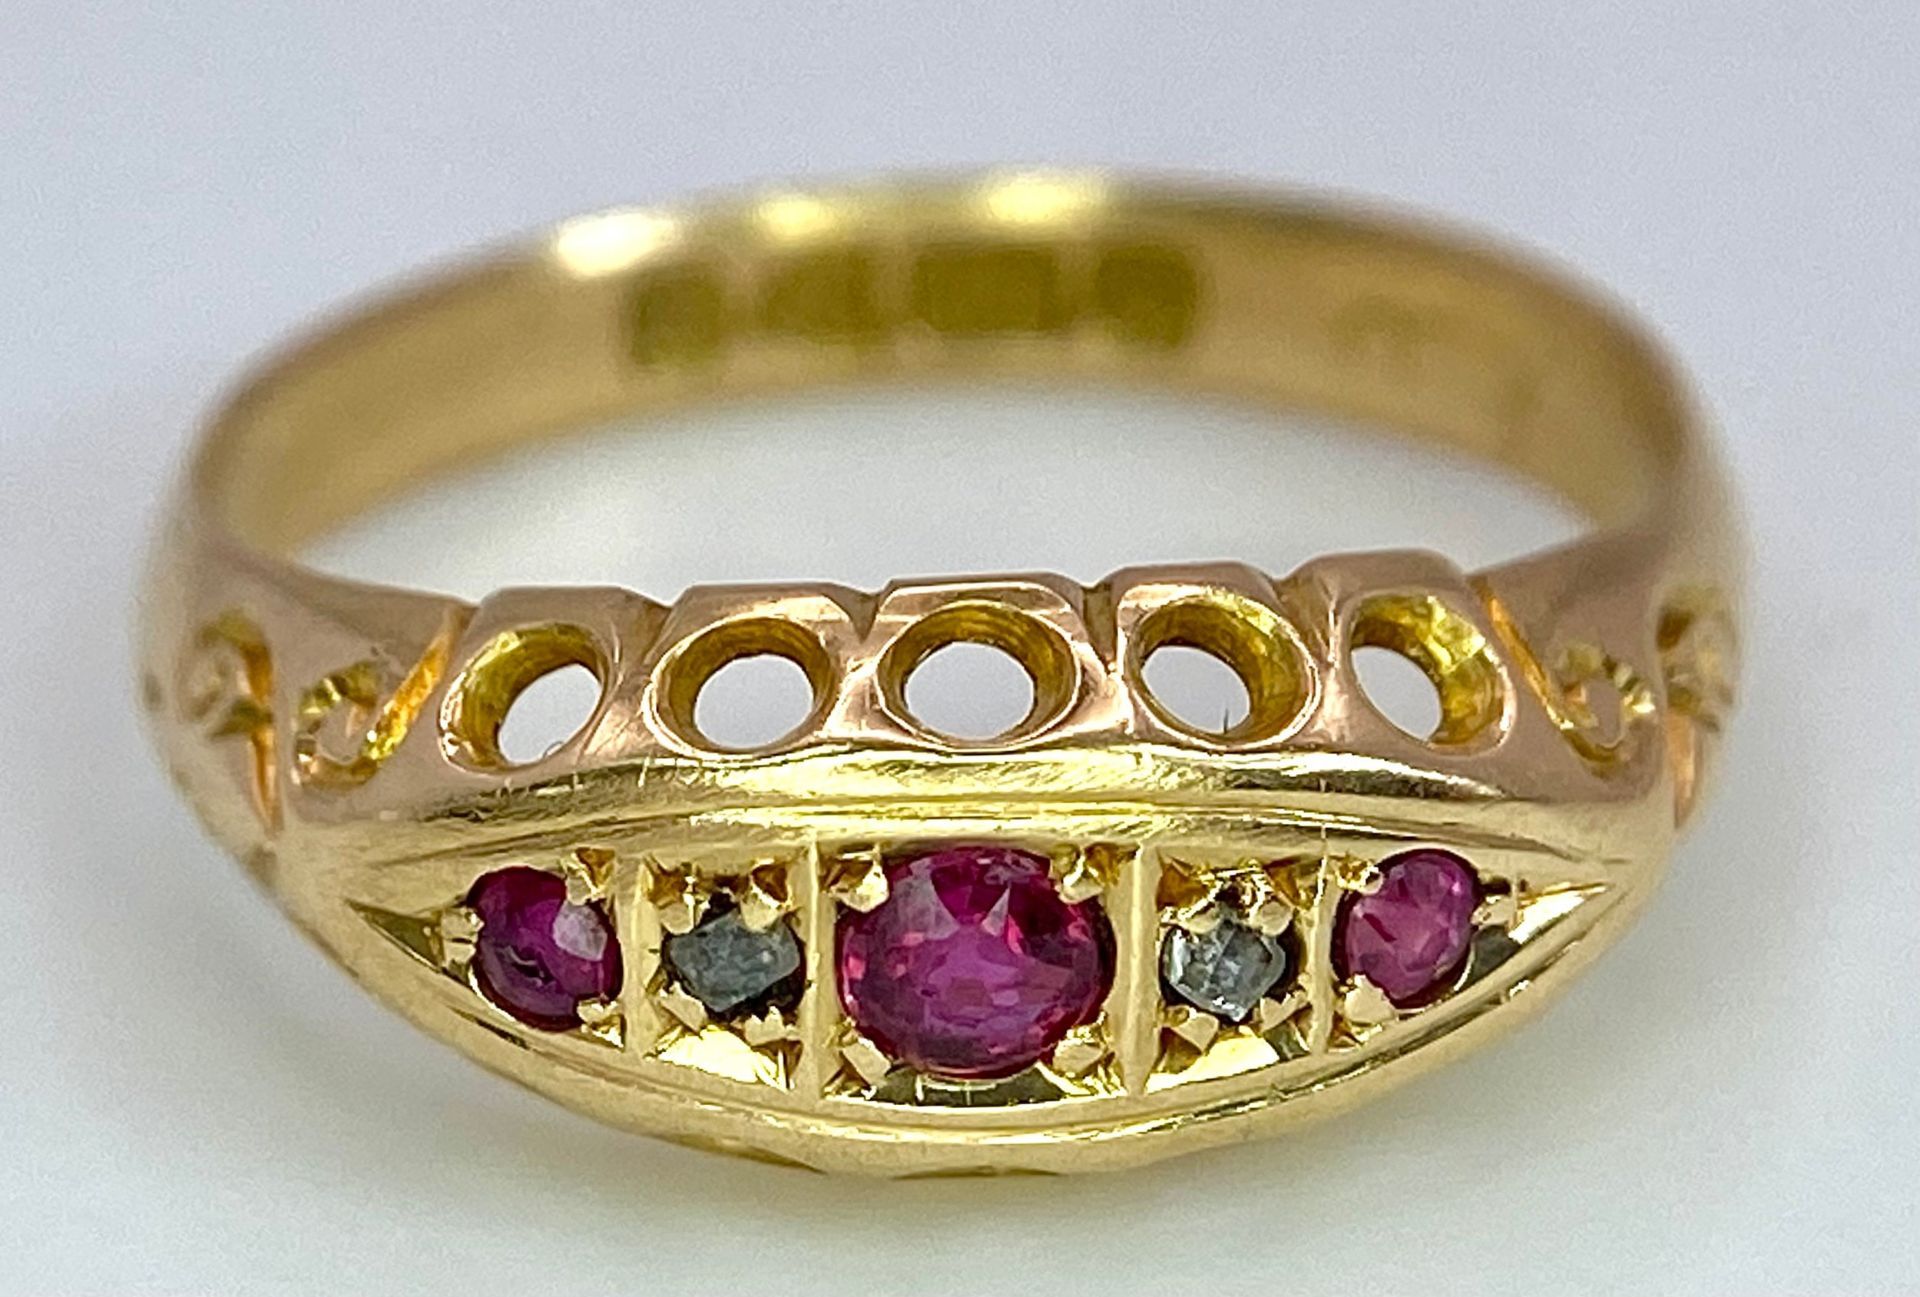 A 18K YELLOW GOLD ANTIQUE DIAMOND & RUBY RING 2.3G SIZE L HALLMARKED CHESTER 1729 A/S 1040 - 2 - Image 4 of 6